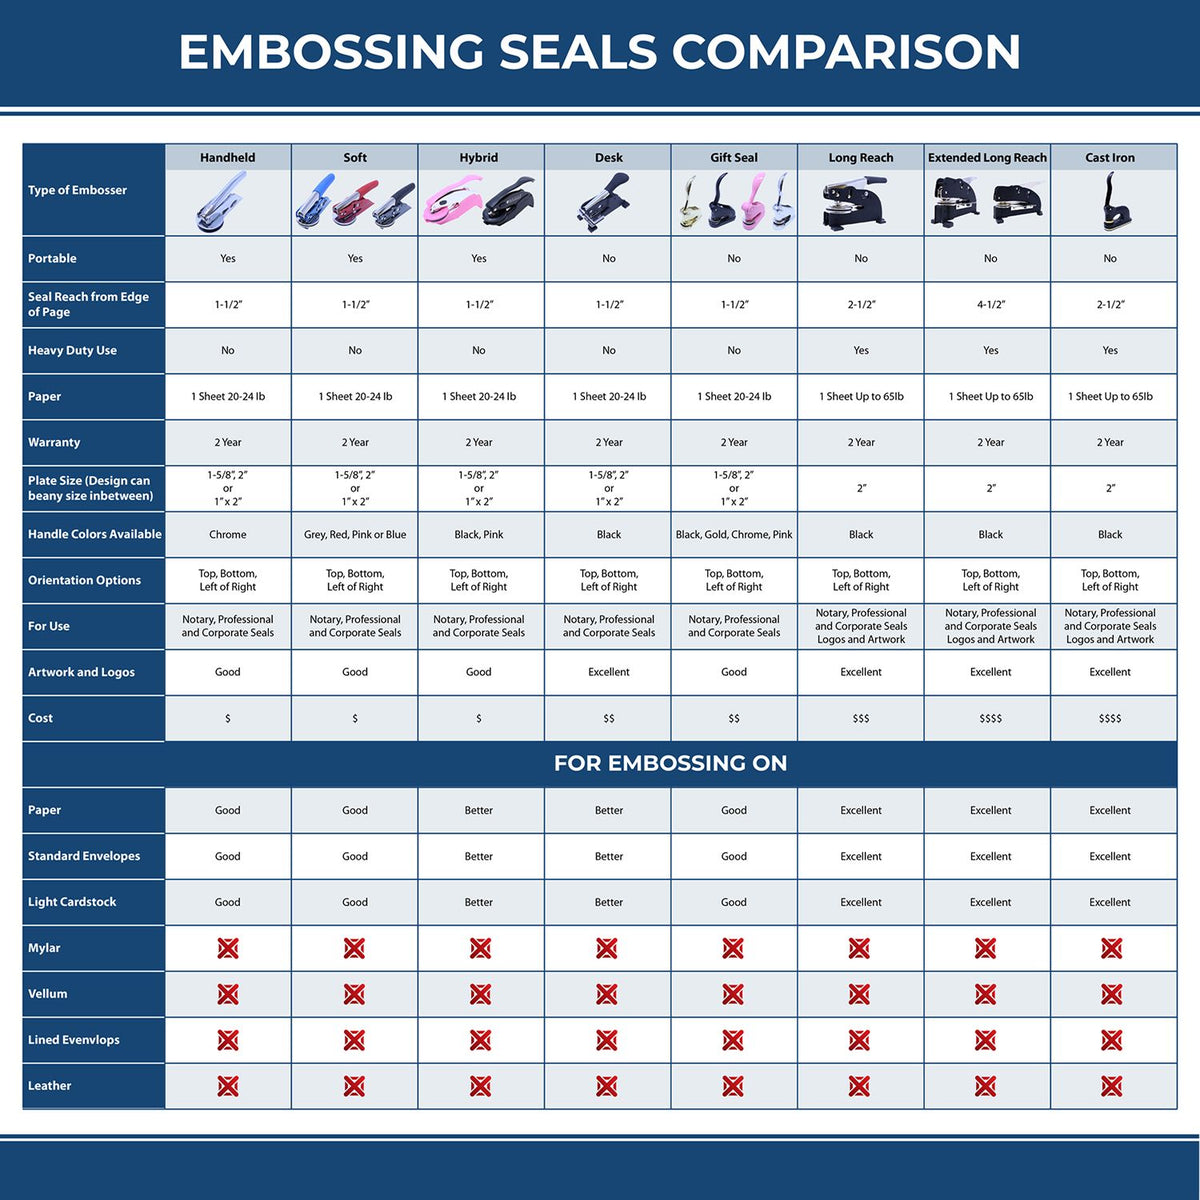 A comparison chart for the different types of mount models available for the Heavy Duty Cast Iron West Virginia Architect Embosser.